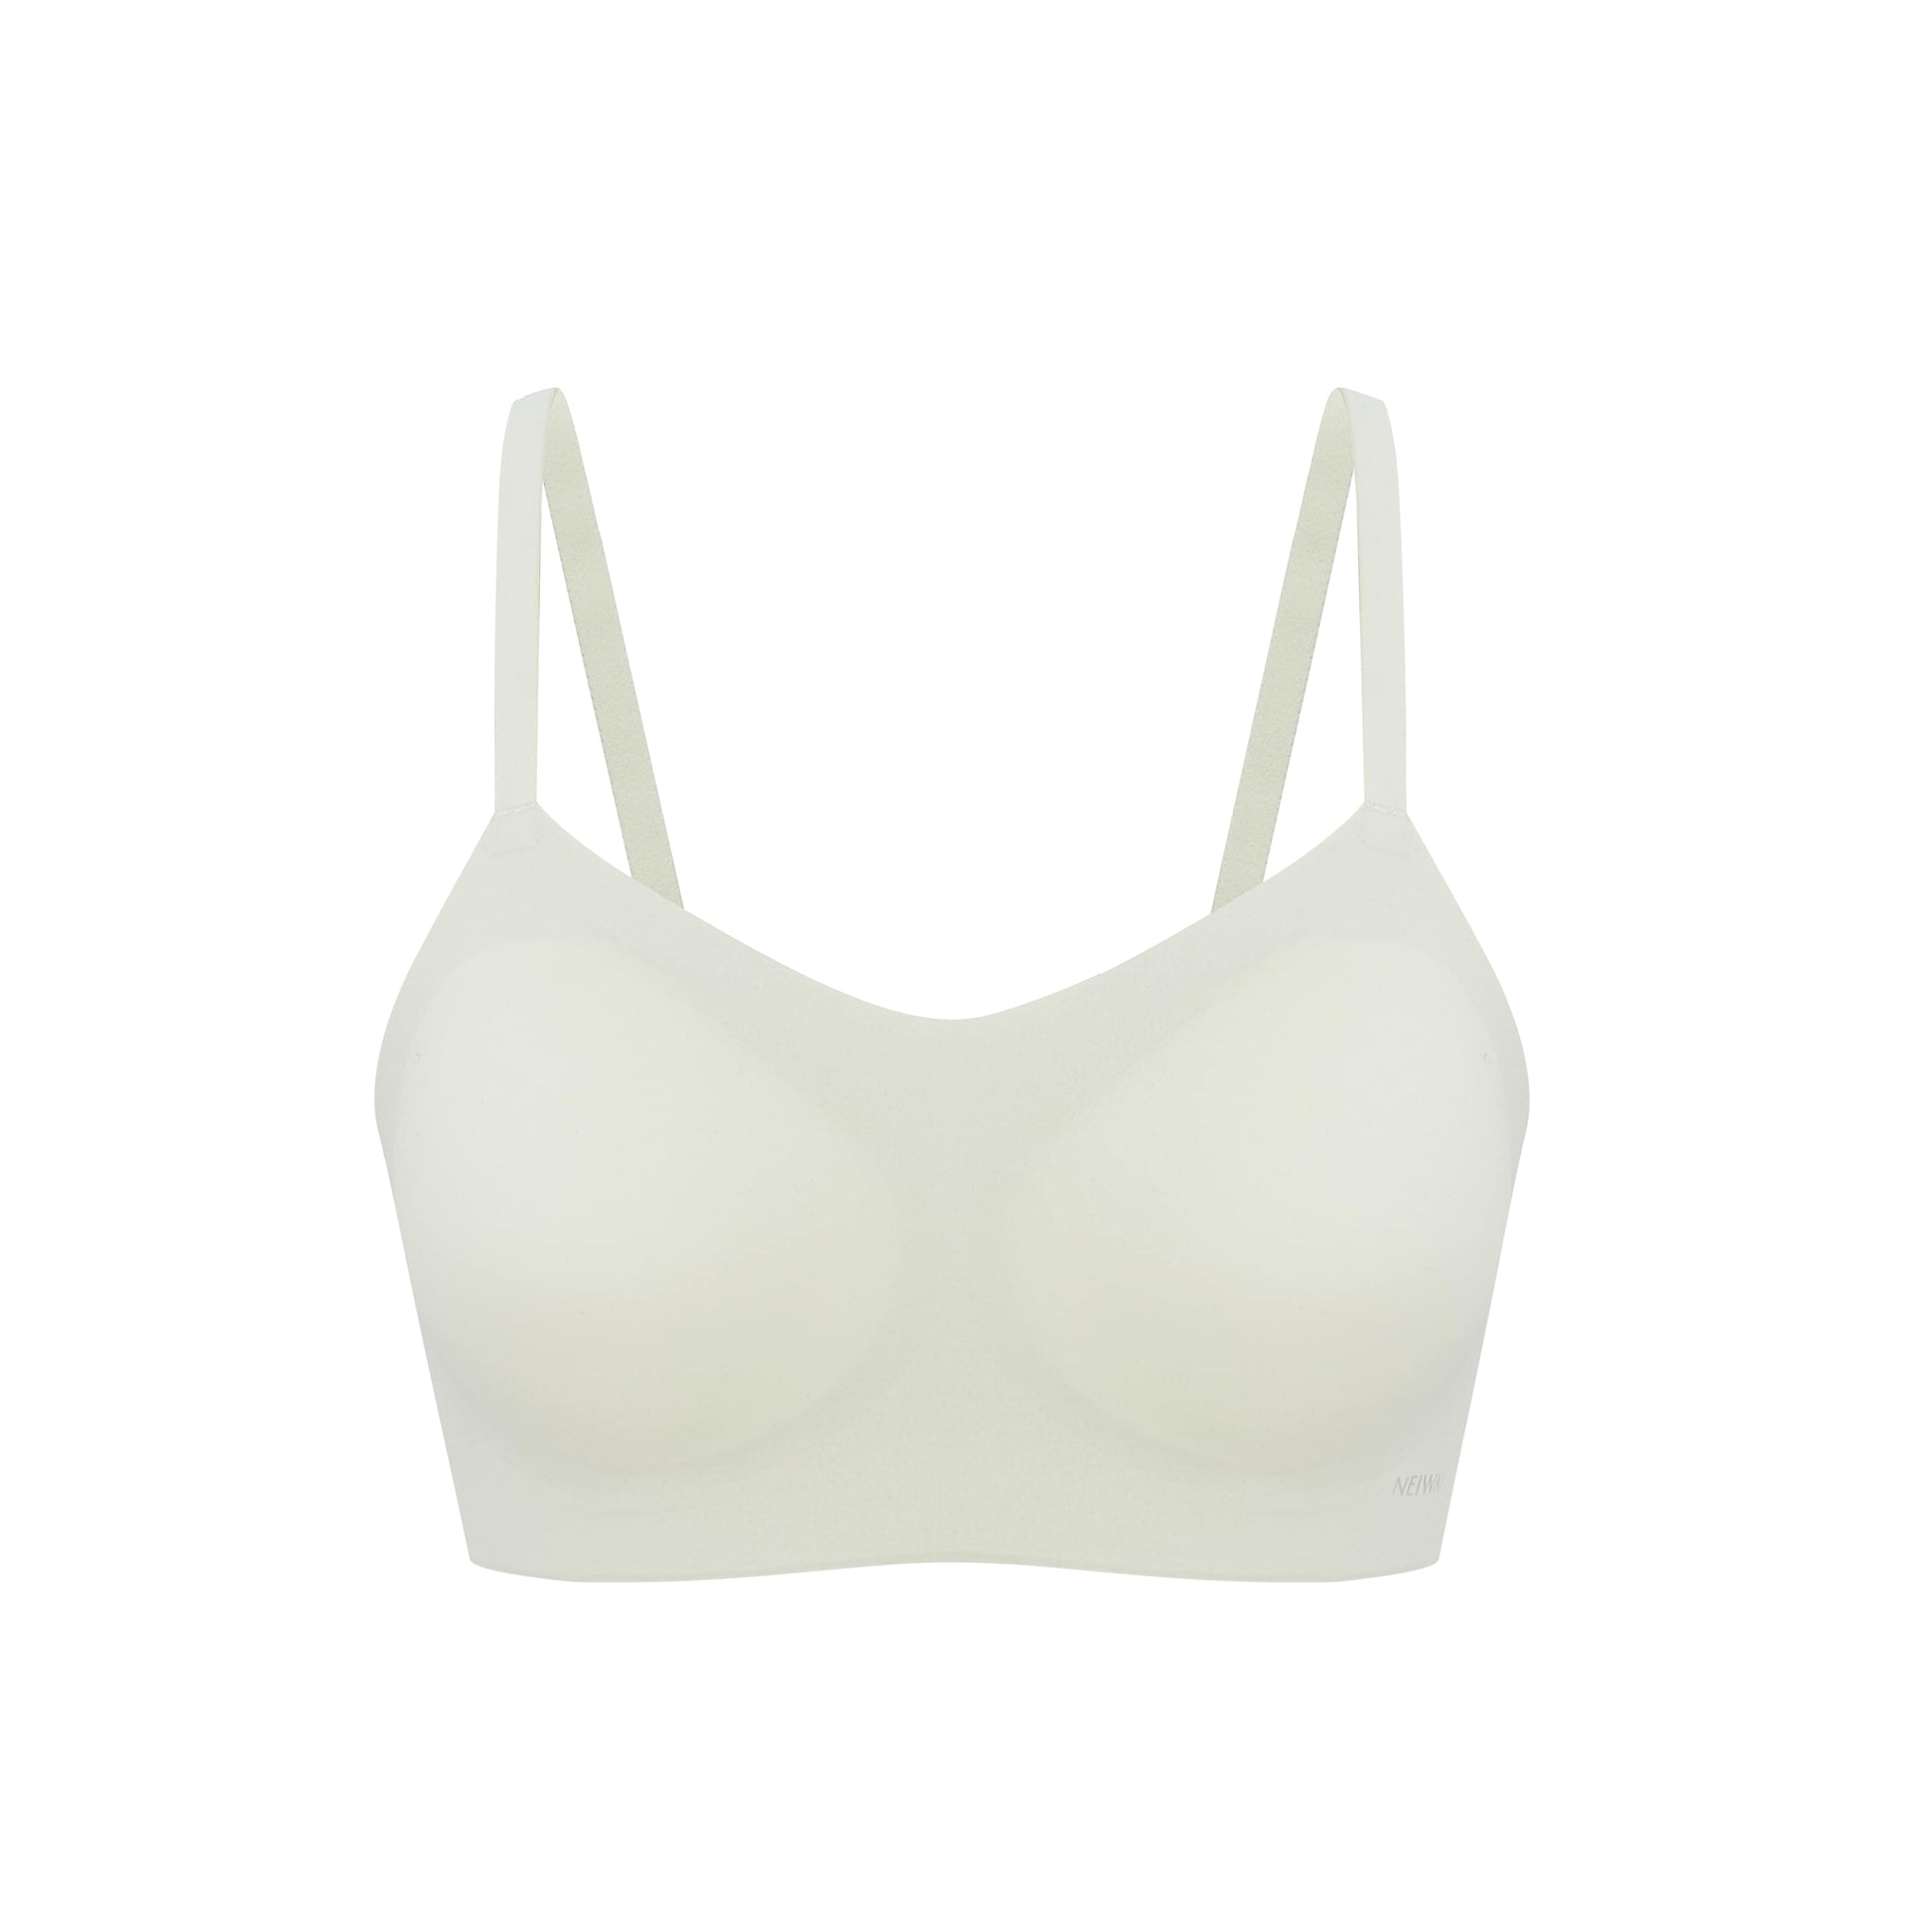 Polyamide blend bra with removable straps